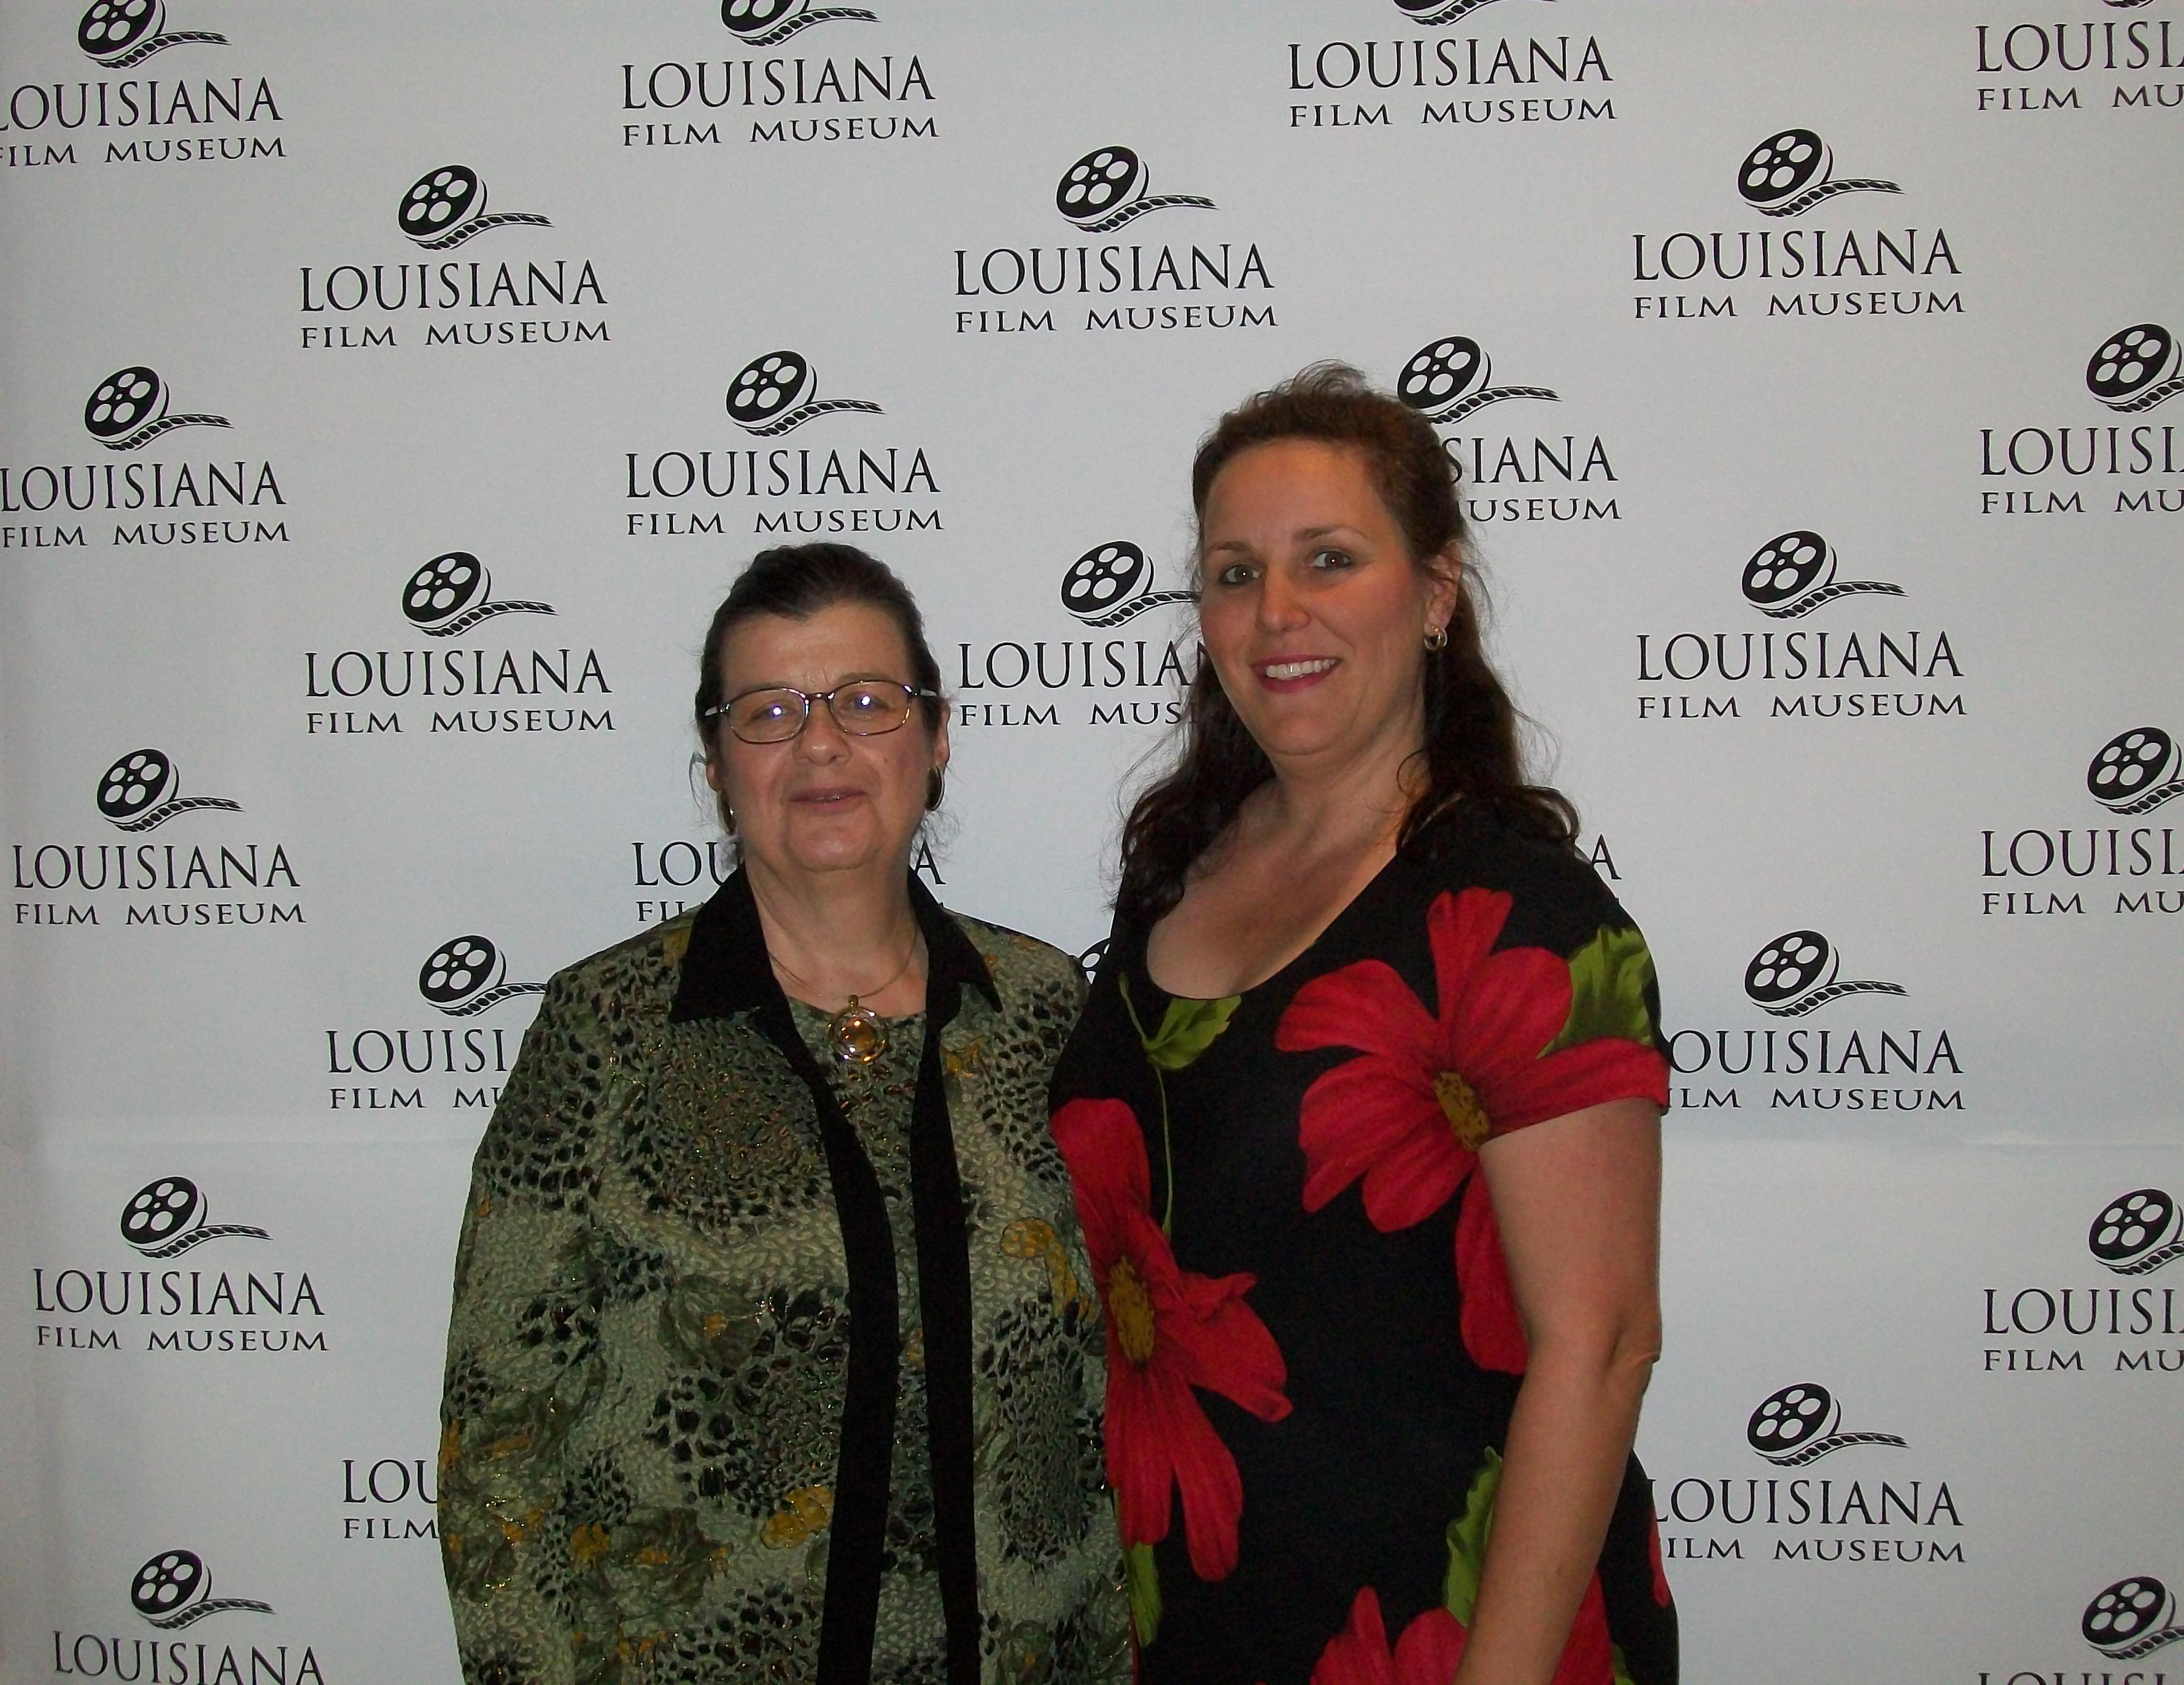 Louisiana Film Museum Opening with Susie Labry